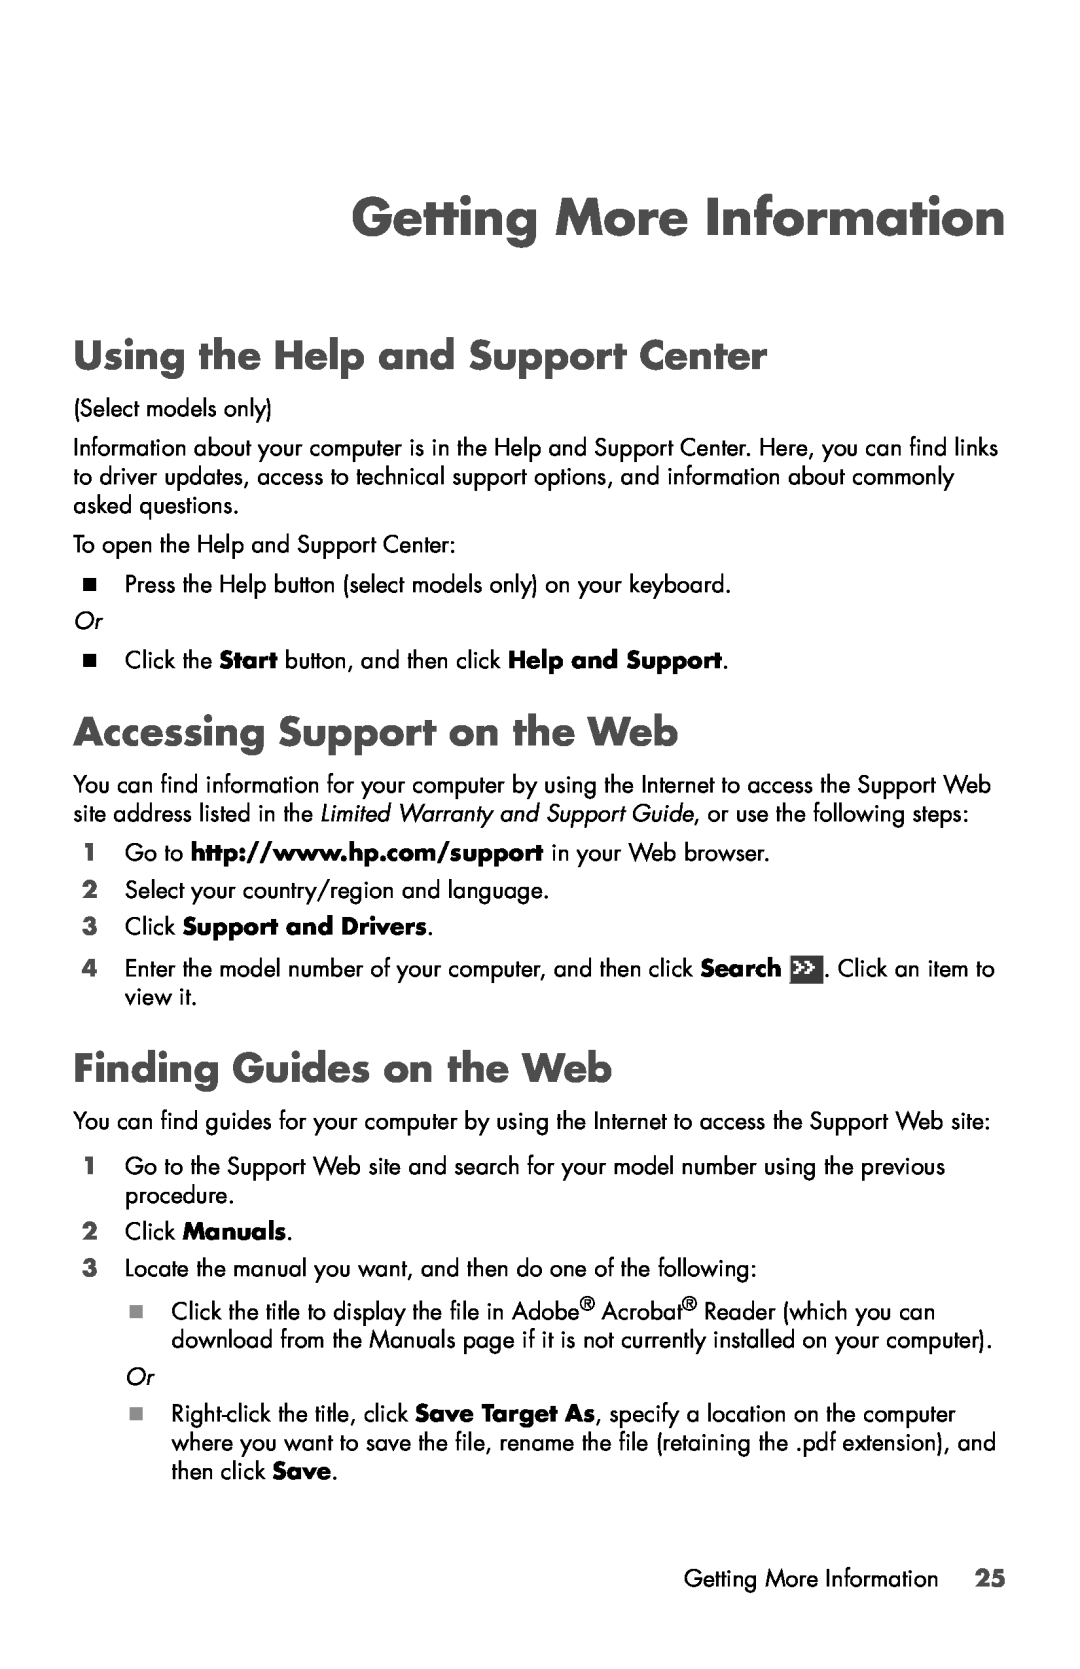 HP 810-350se, 120-1000z, 120-1031 Getting More Information, Using the Help and Support Center, Accessing Support on the Web 